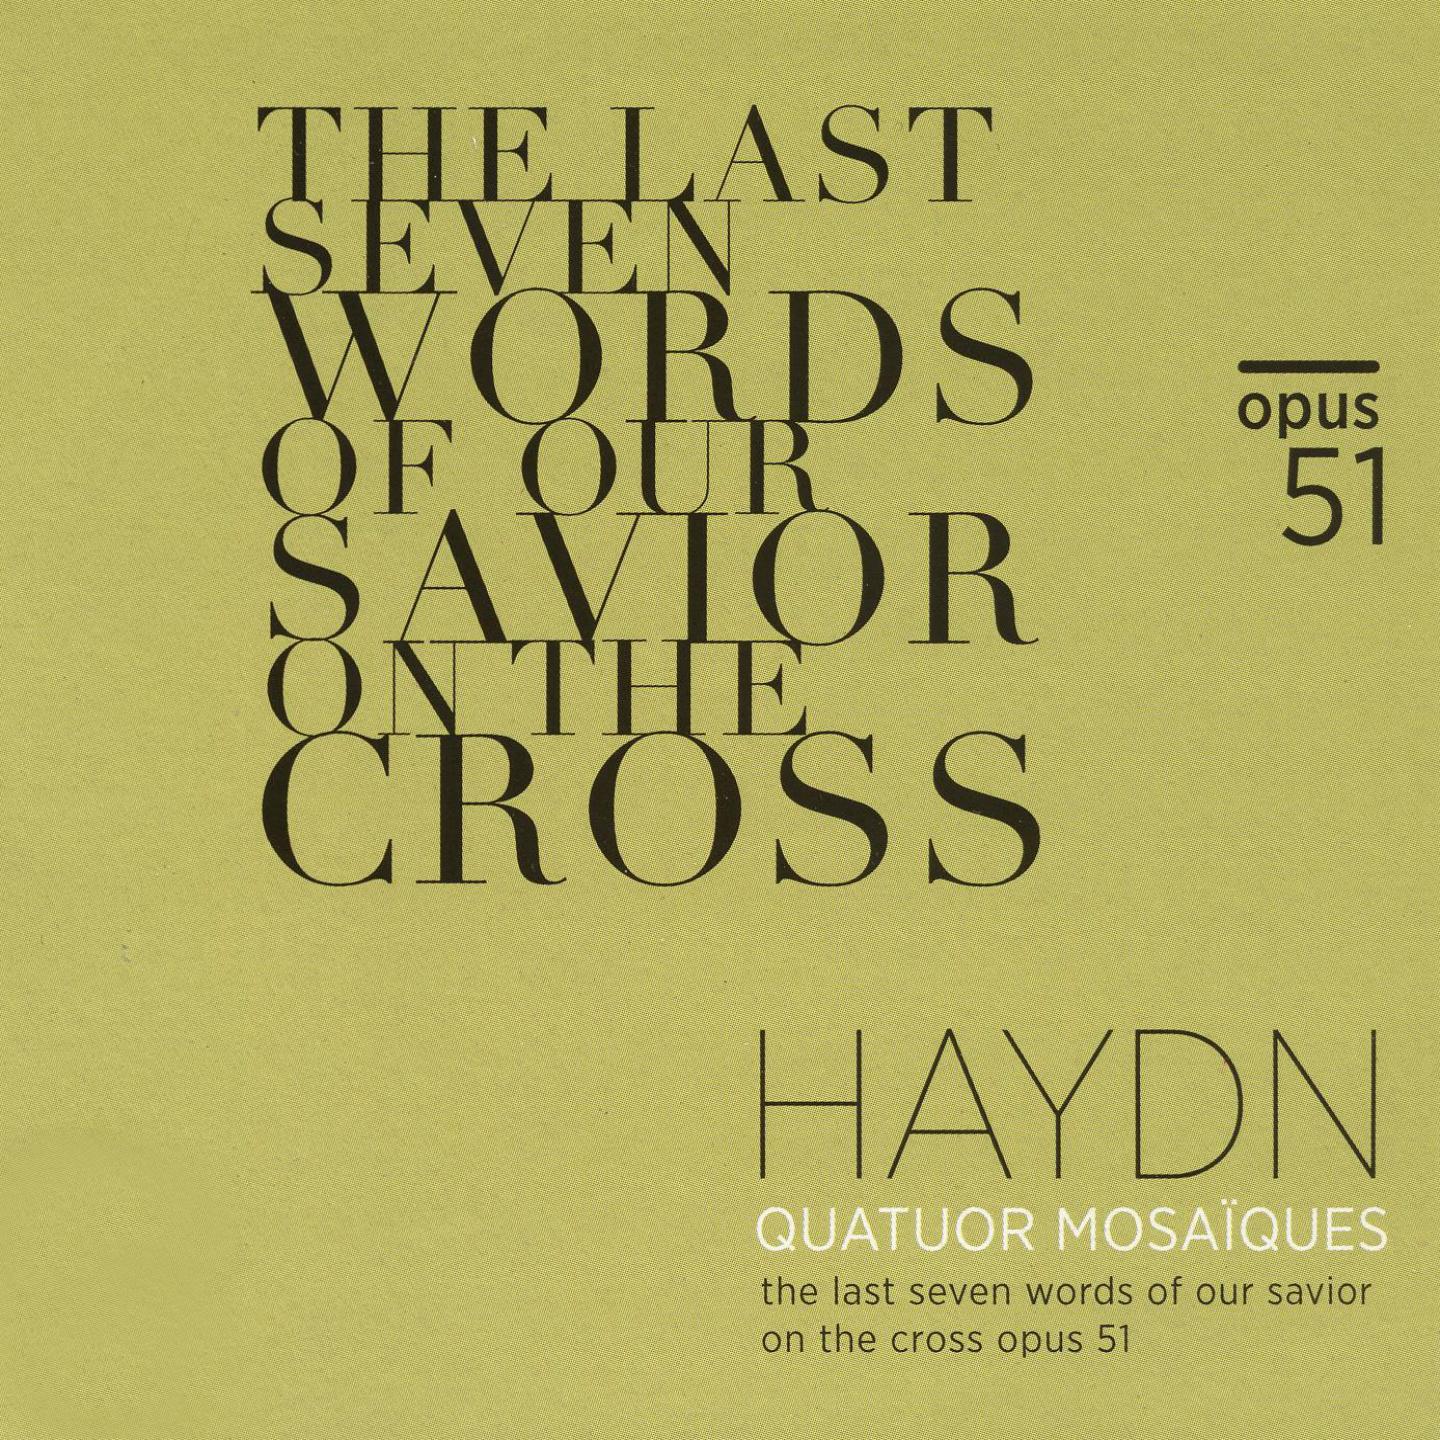 Haydn: The Last Seven Words of Our Savior on the Cross